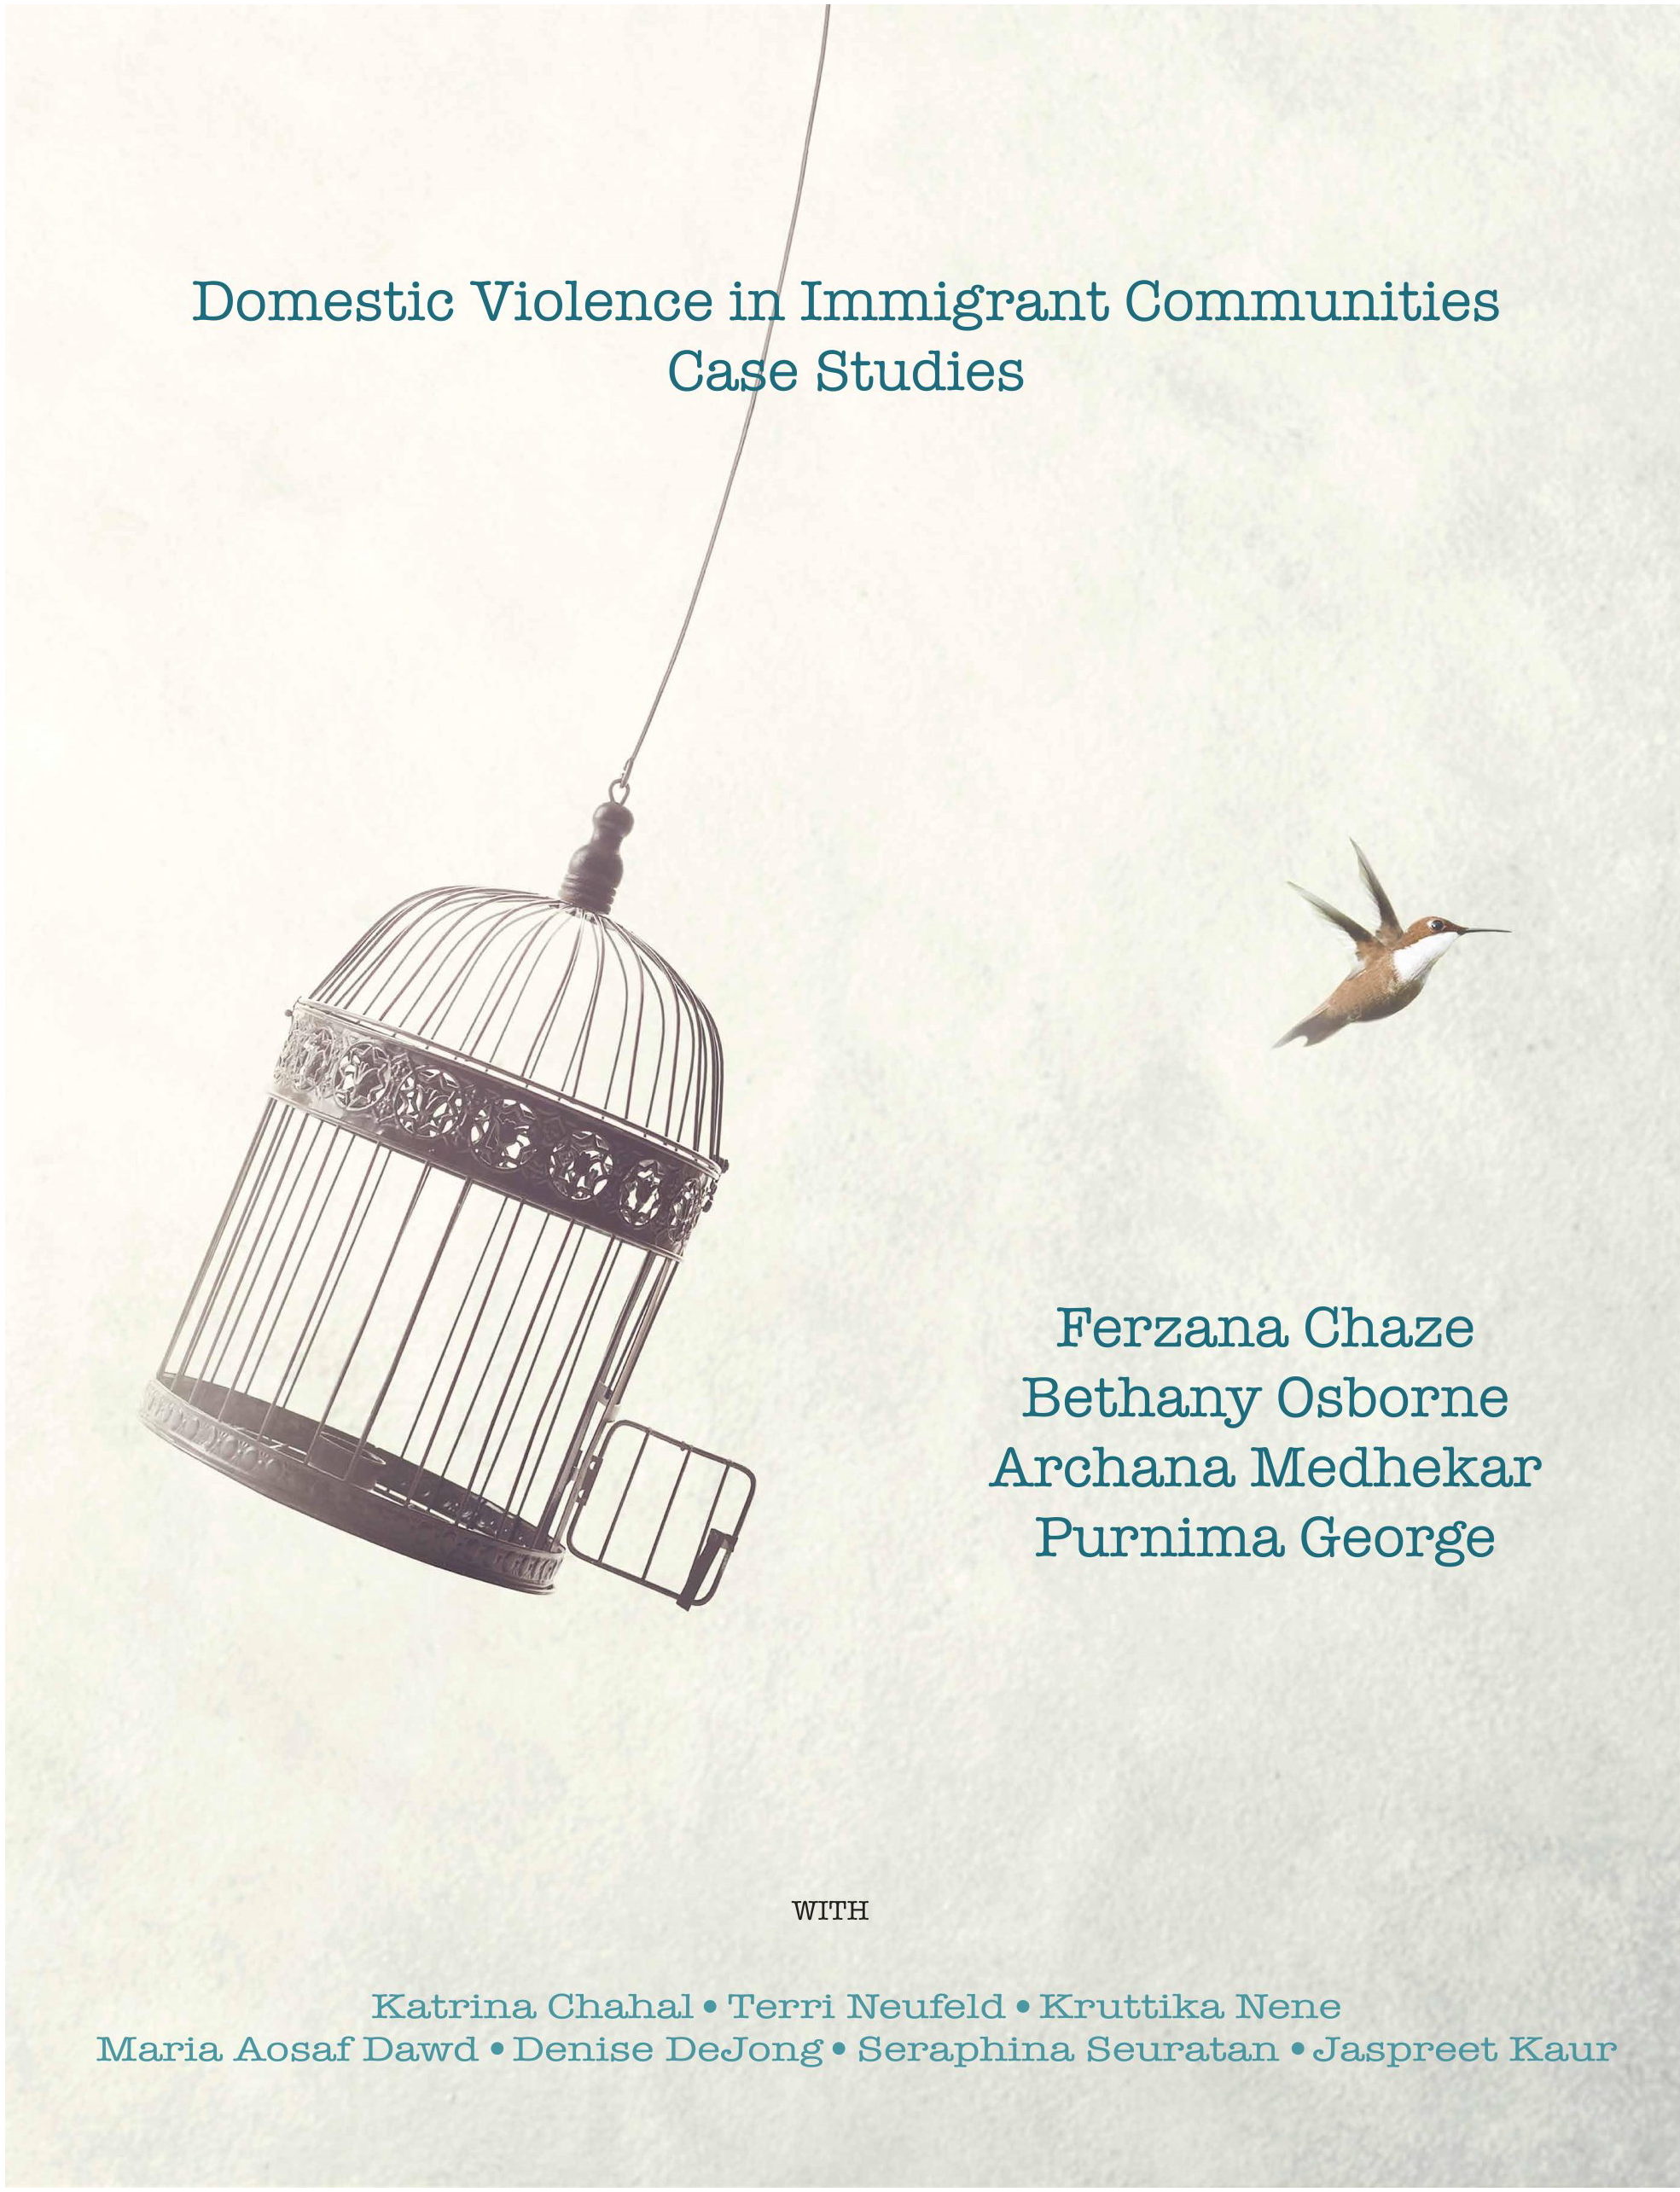 Domestic Violence in Immigrant Communities: Breaking the Cycle